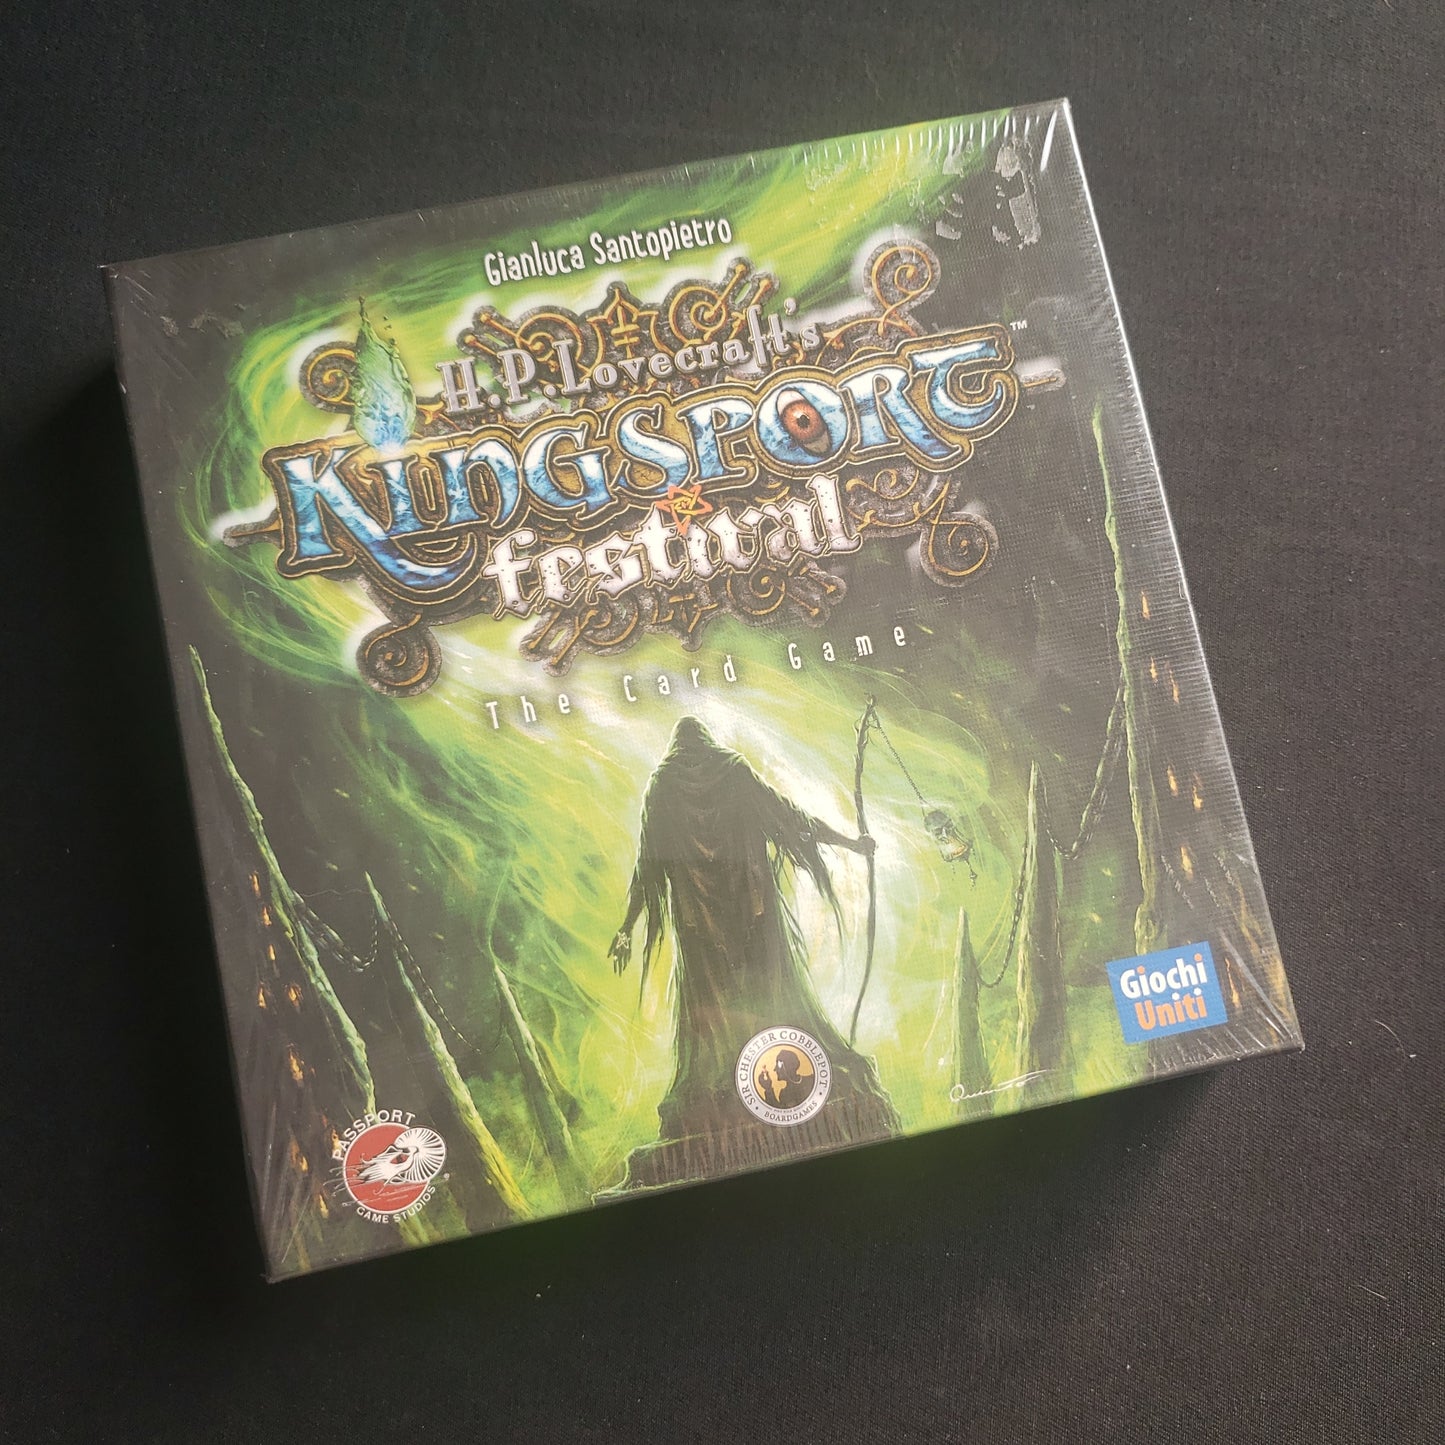 Image shows the front cover of the box of Kingsport Festival: The Card Game